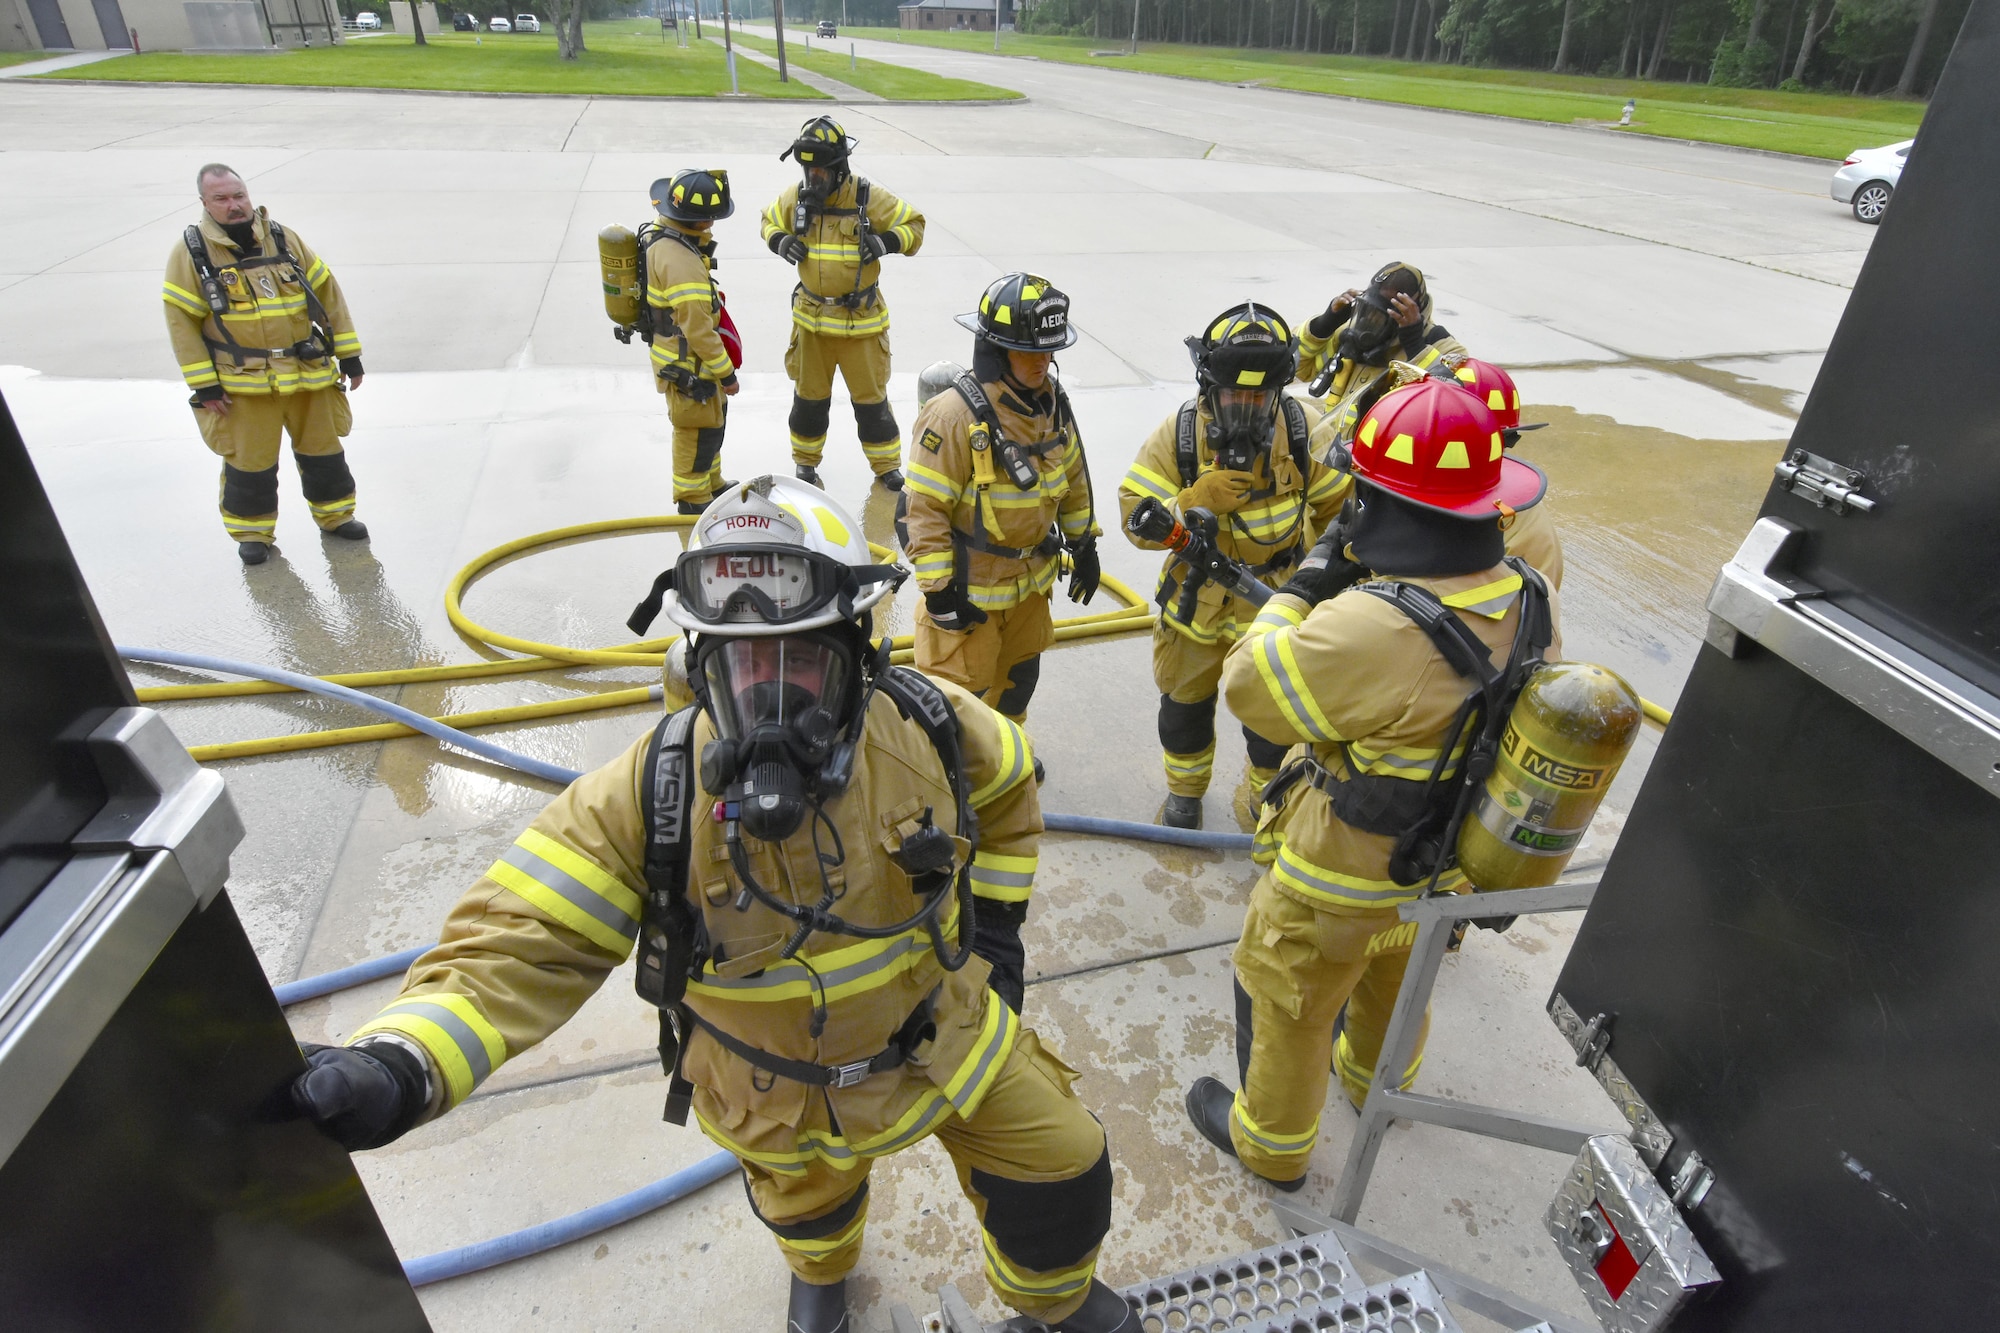 Arnold Air Force Base paramedic/firefighters prepare to enter the Kentucky Fire Commission mobile live fire rescue simulation training structure on May 11. Forty-one base firefighters, participated in the annual training experiencing high temperatures and smoke, and practicing firefighting and self-rescue techniques. (U.S. Air Force photo/Rick Goodfriend)